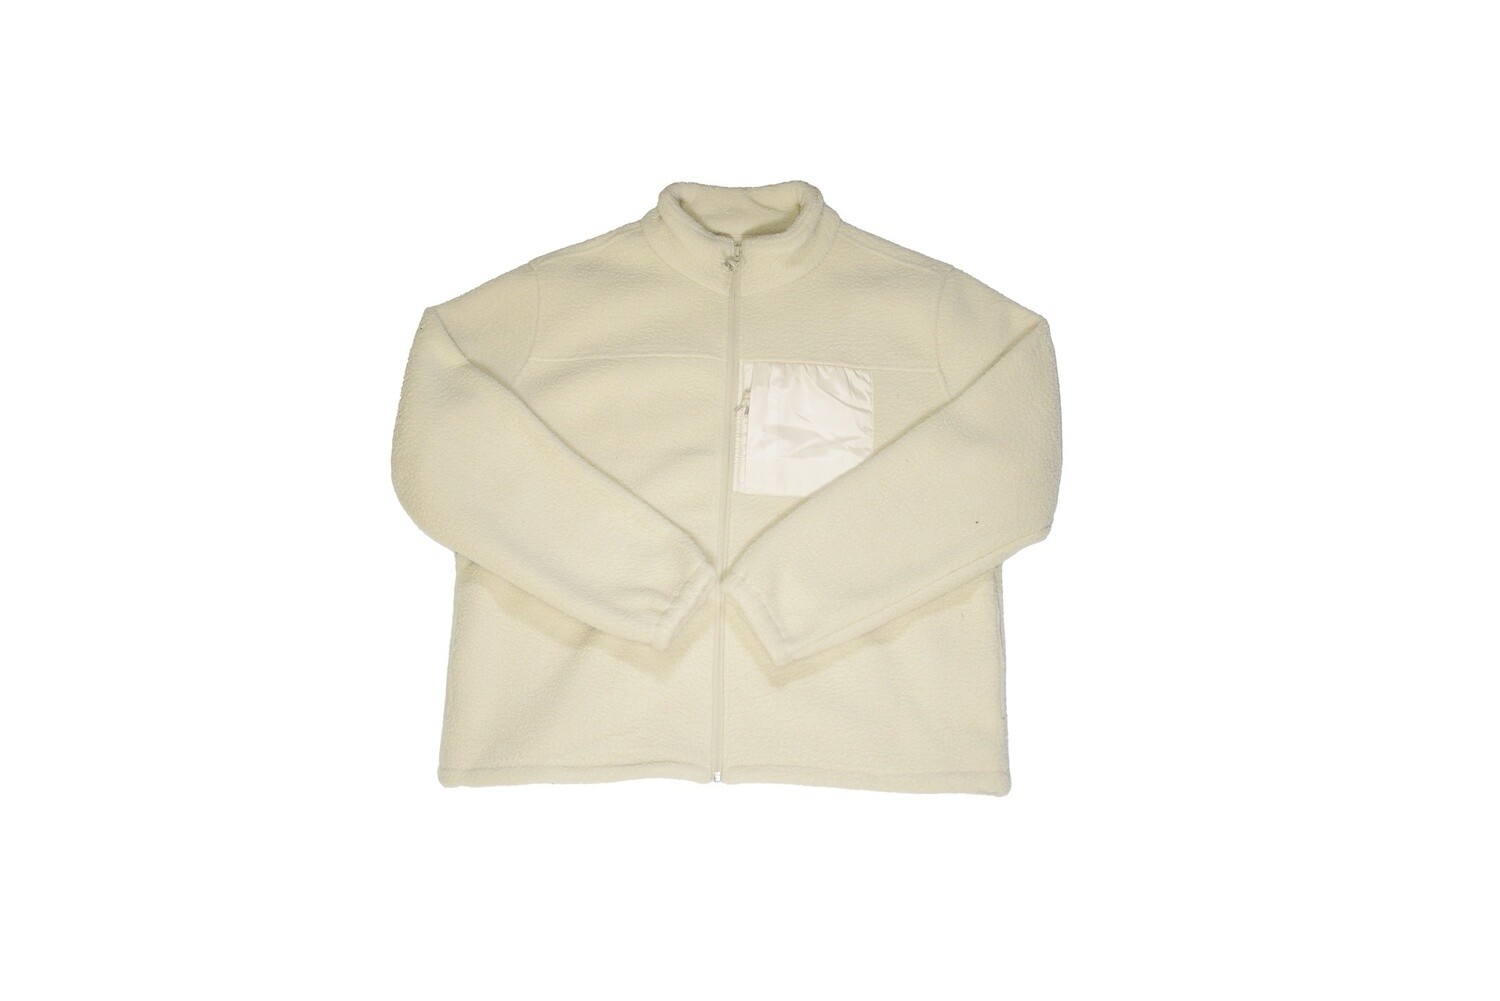 Sherpa Jacket, Colour: Beige, Size: Small